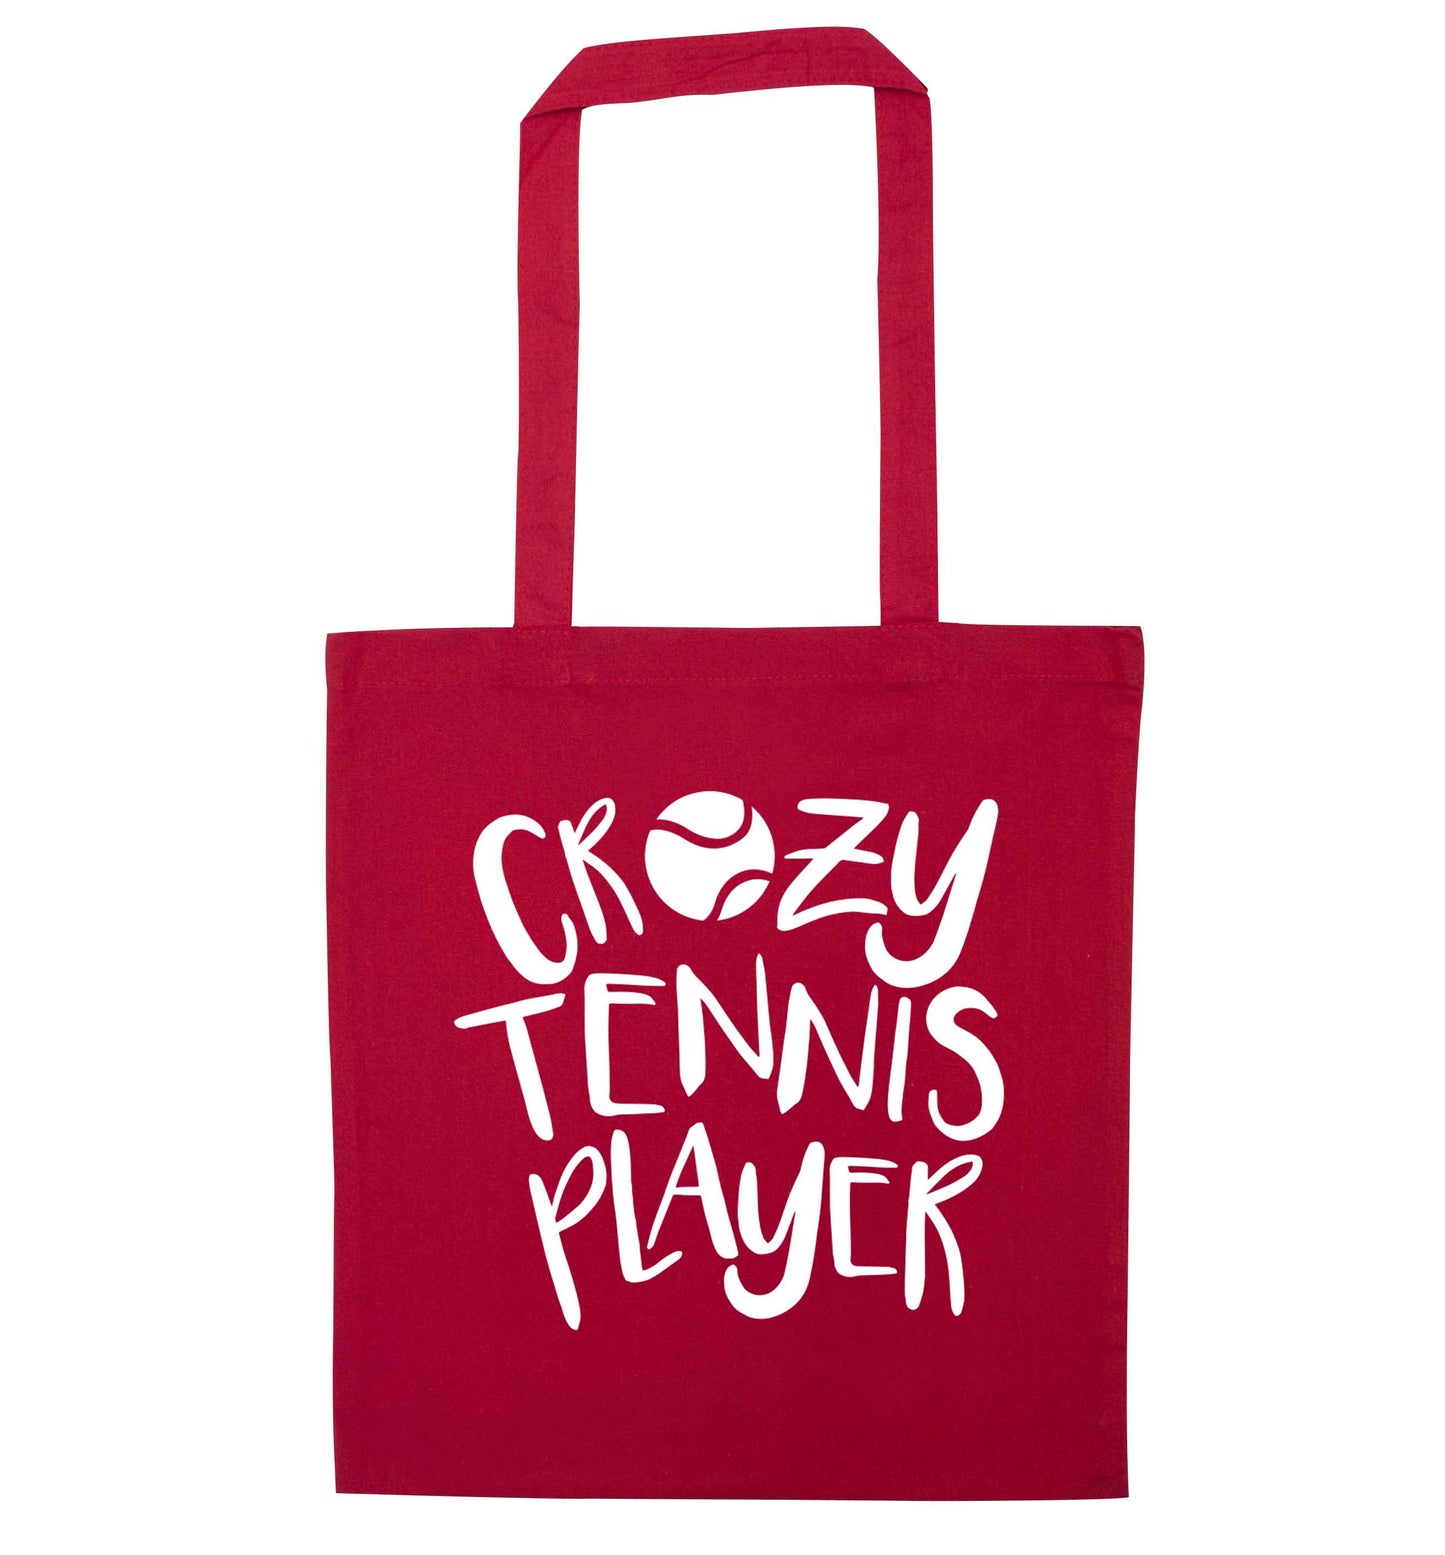 Crazy tennis player red tote bag